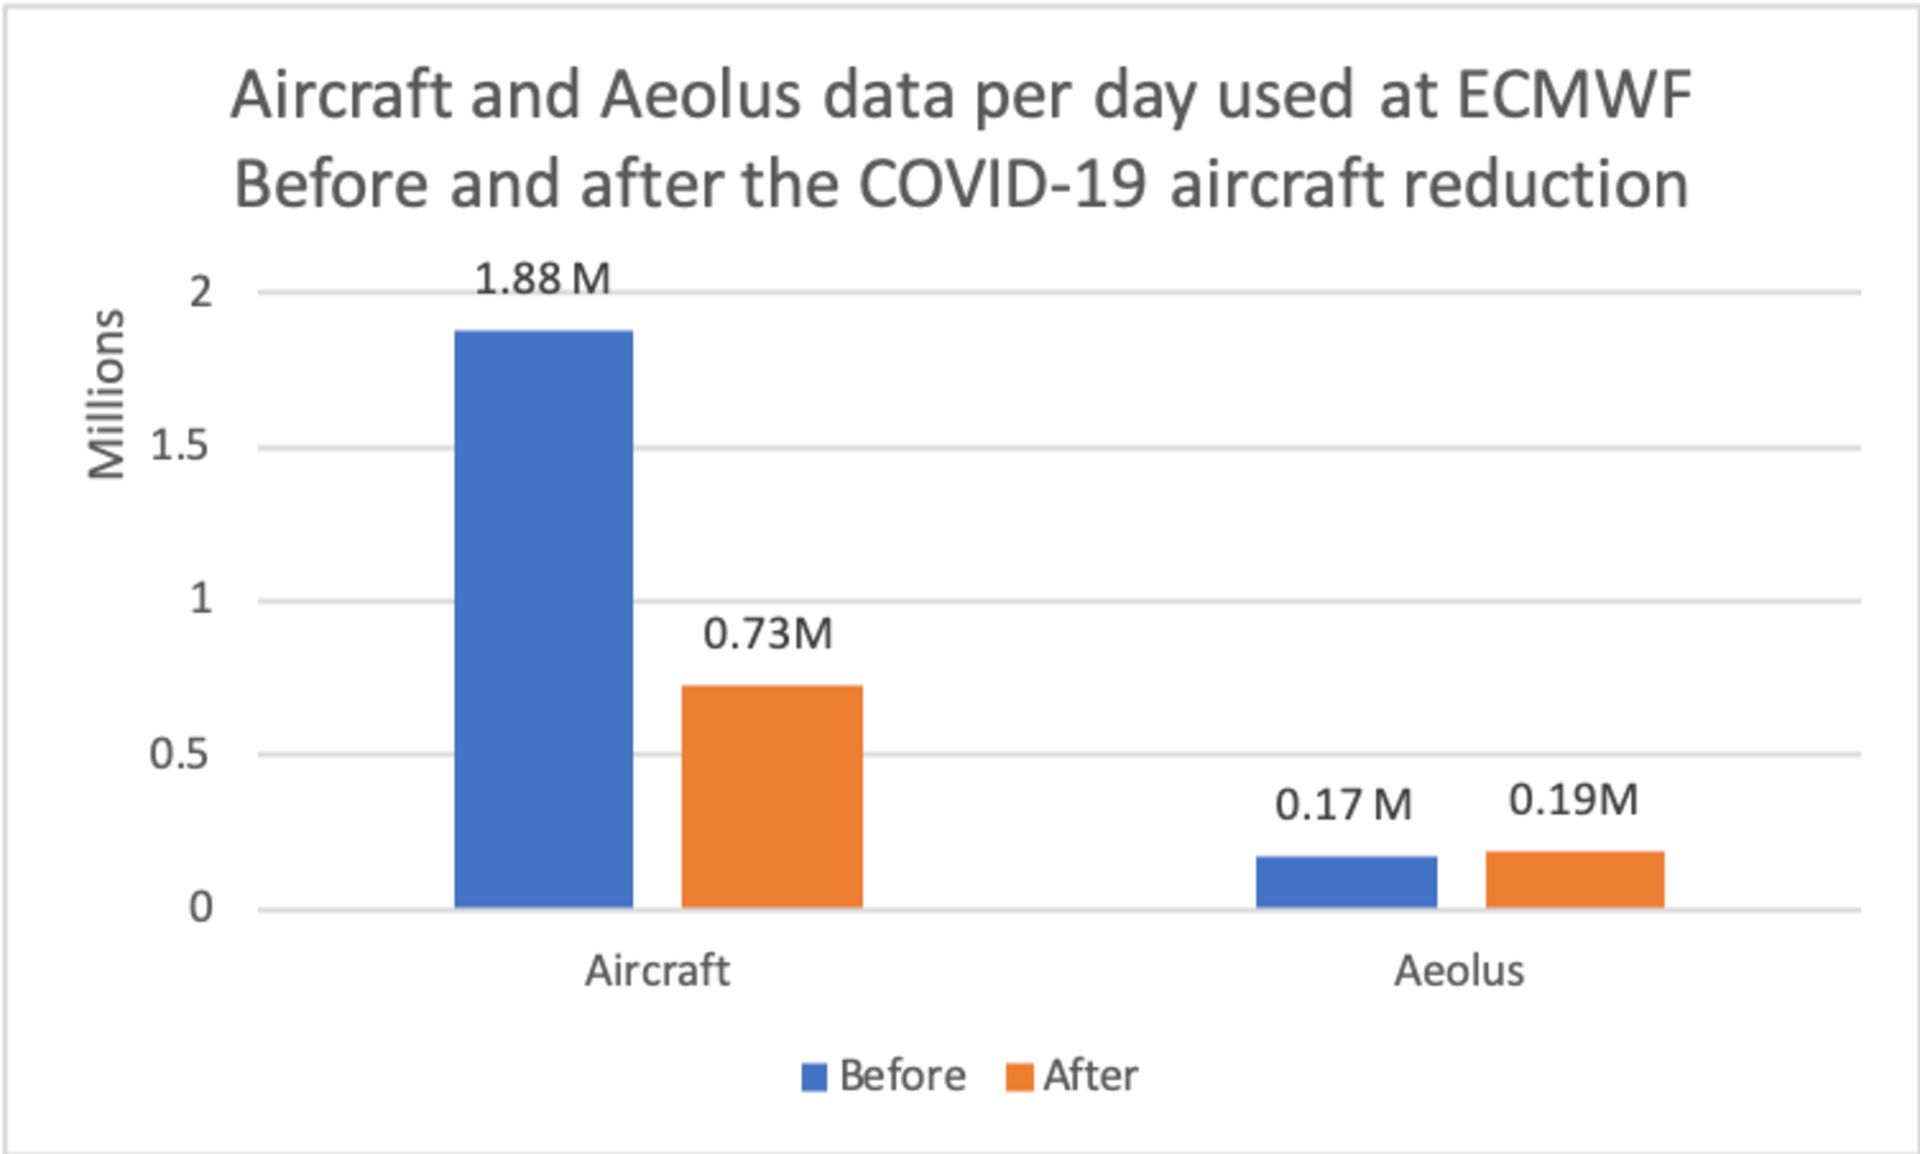 Aircraft and Aeolus data before and during COVID-19